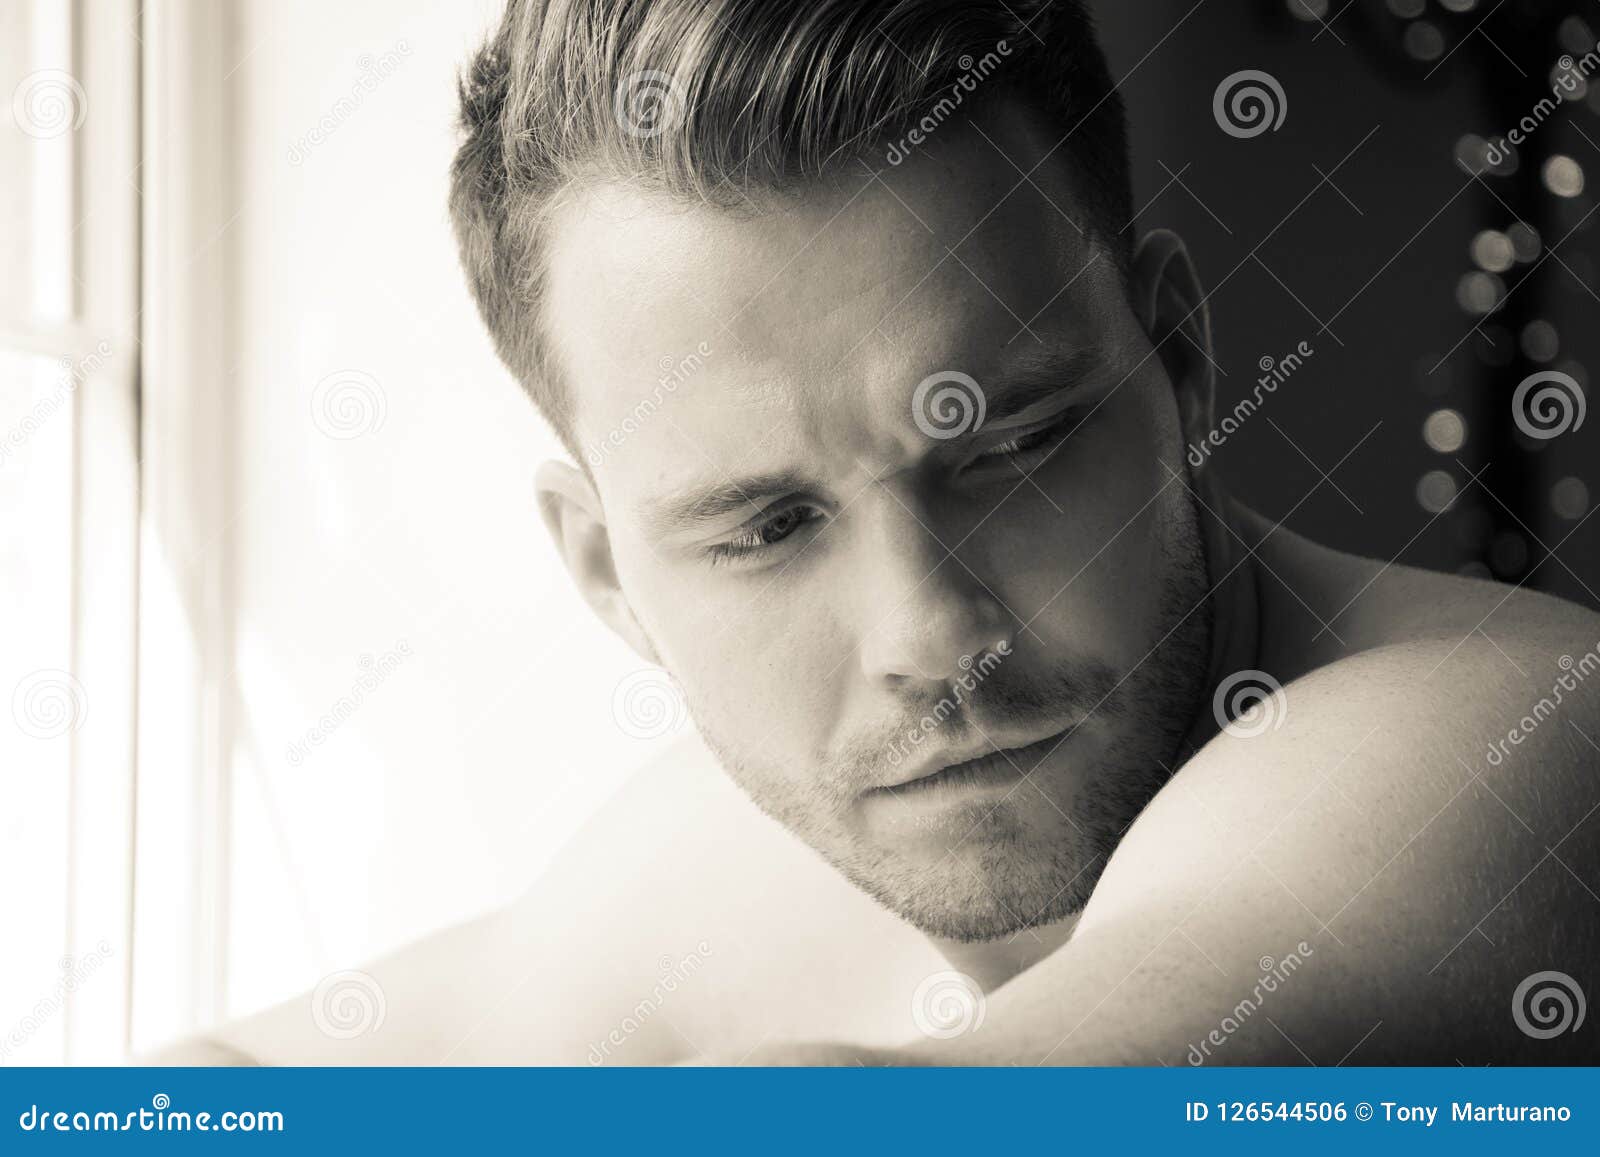 hunky muscular, shirtless man with defined abs and muscles looks out of window